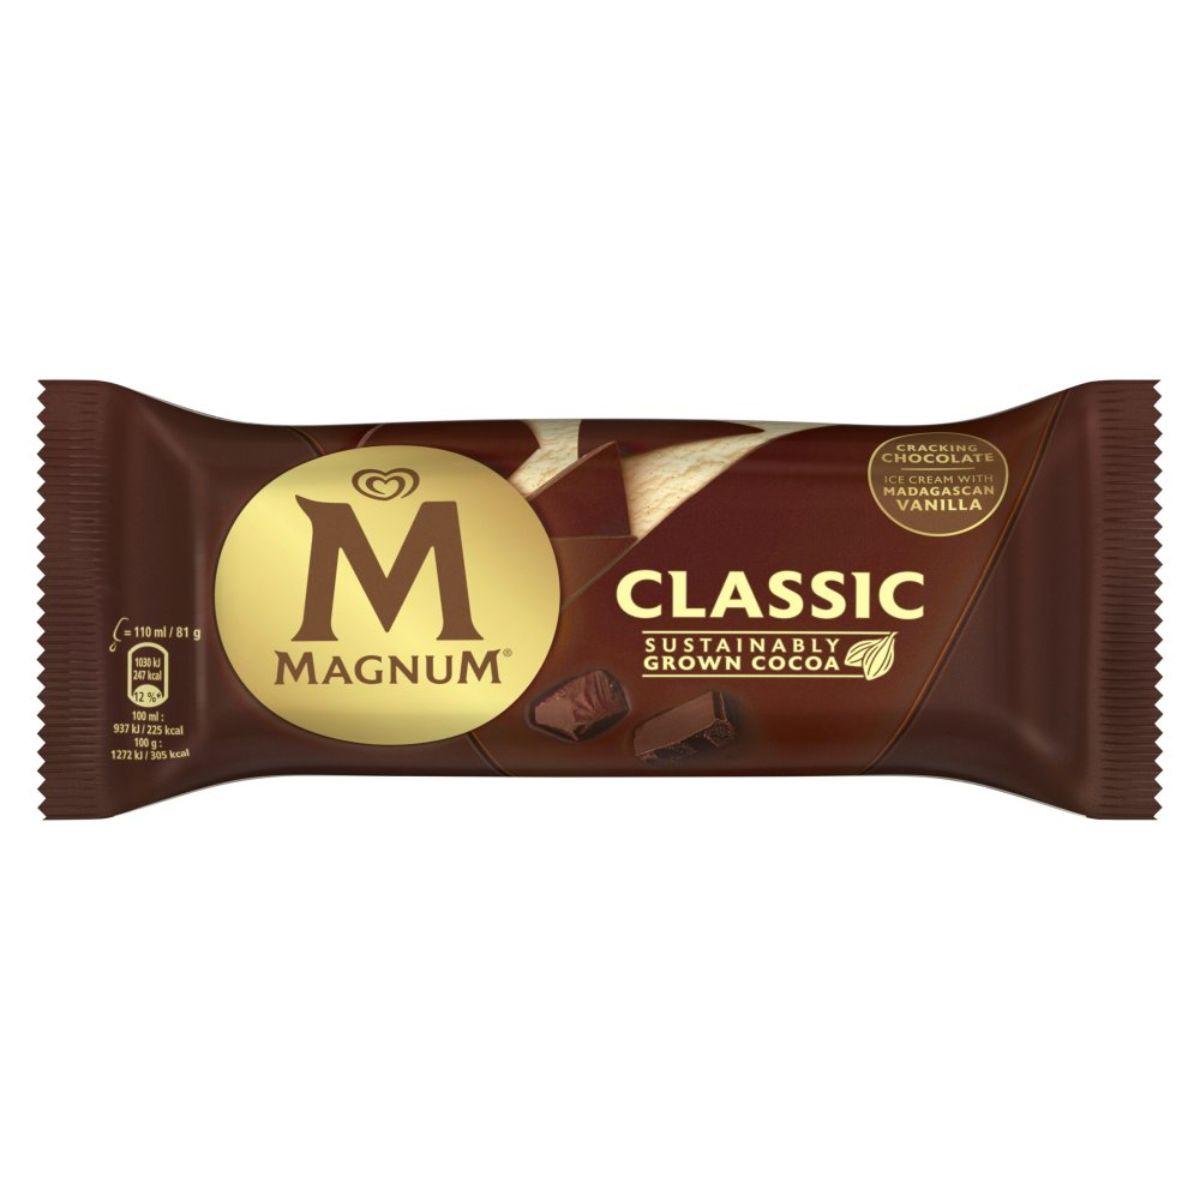 A wrapped Walls - Magnum Ice Cream Stick Classic - 110ml featuring vanilla ice cream and chocolate coating, with labels highlighting sustainably grown cocoa.